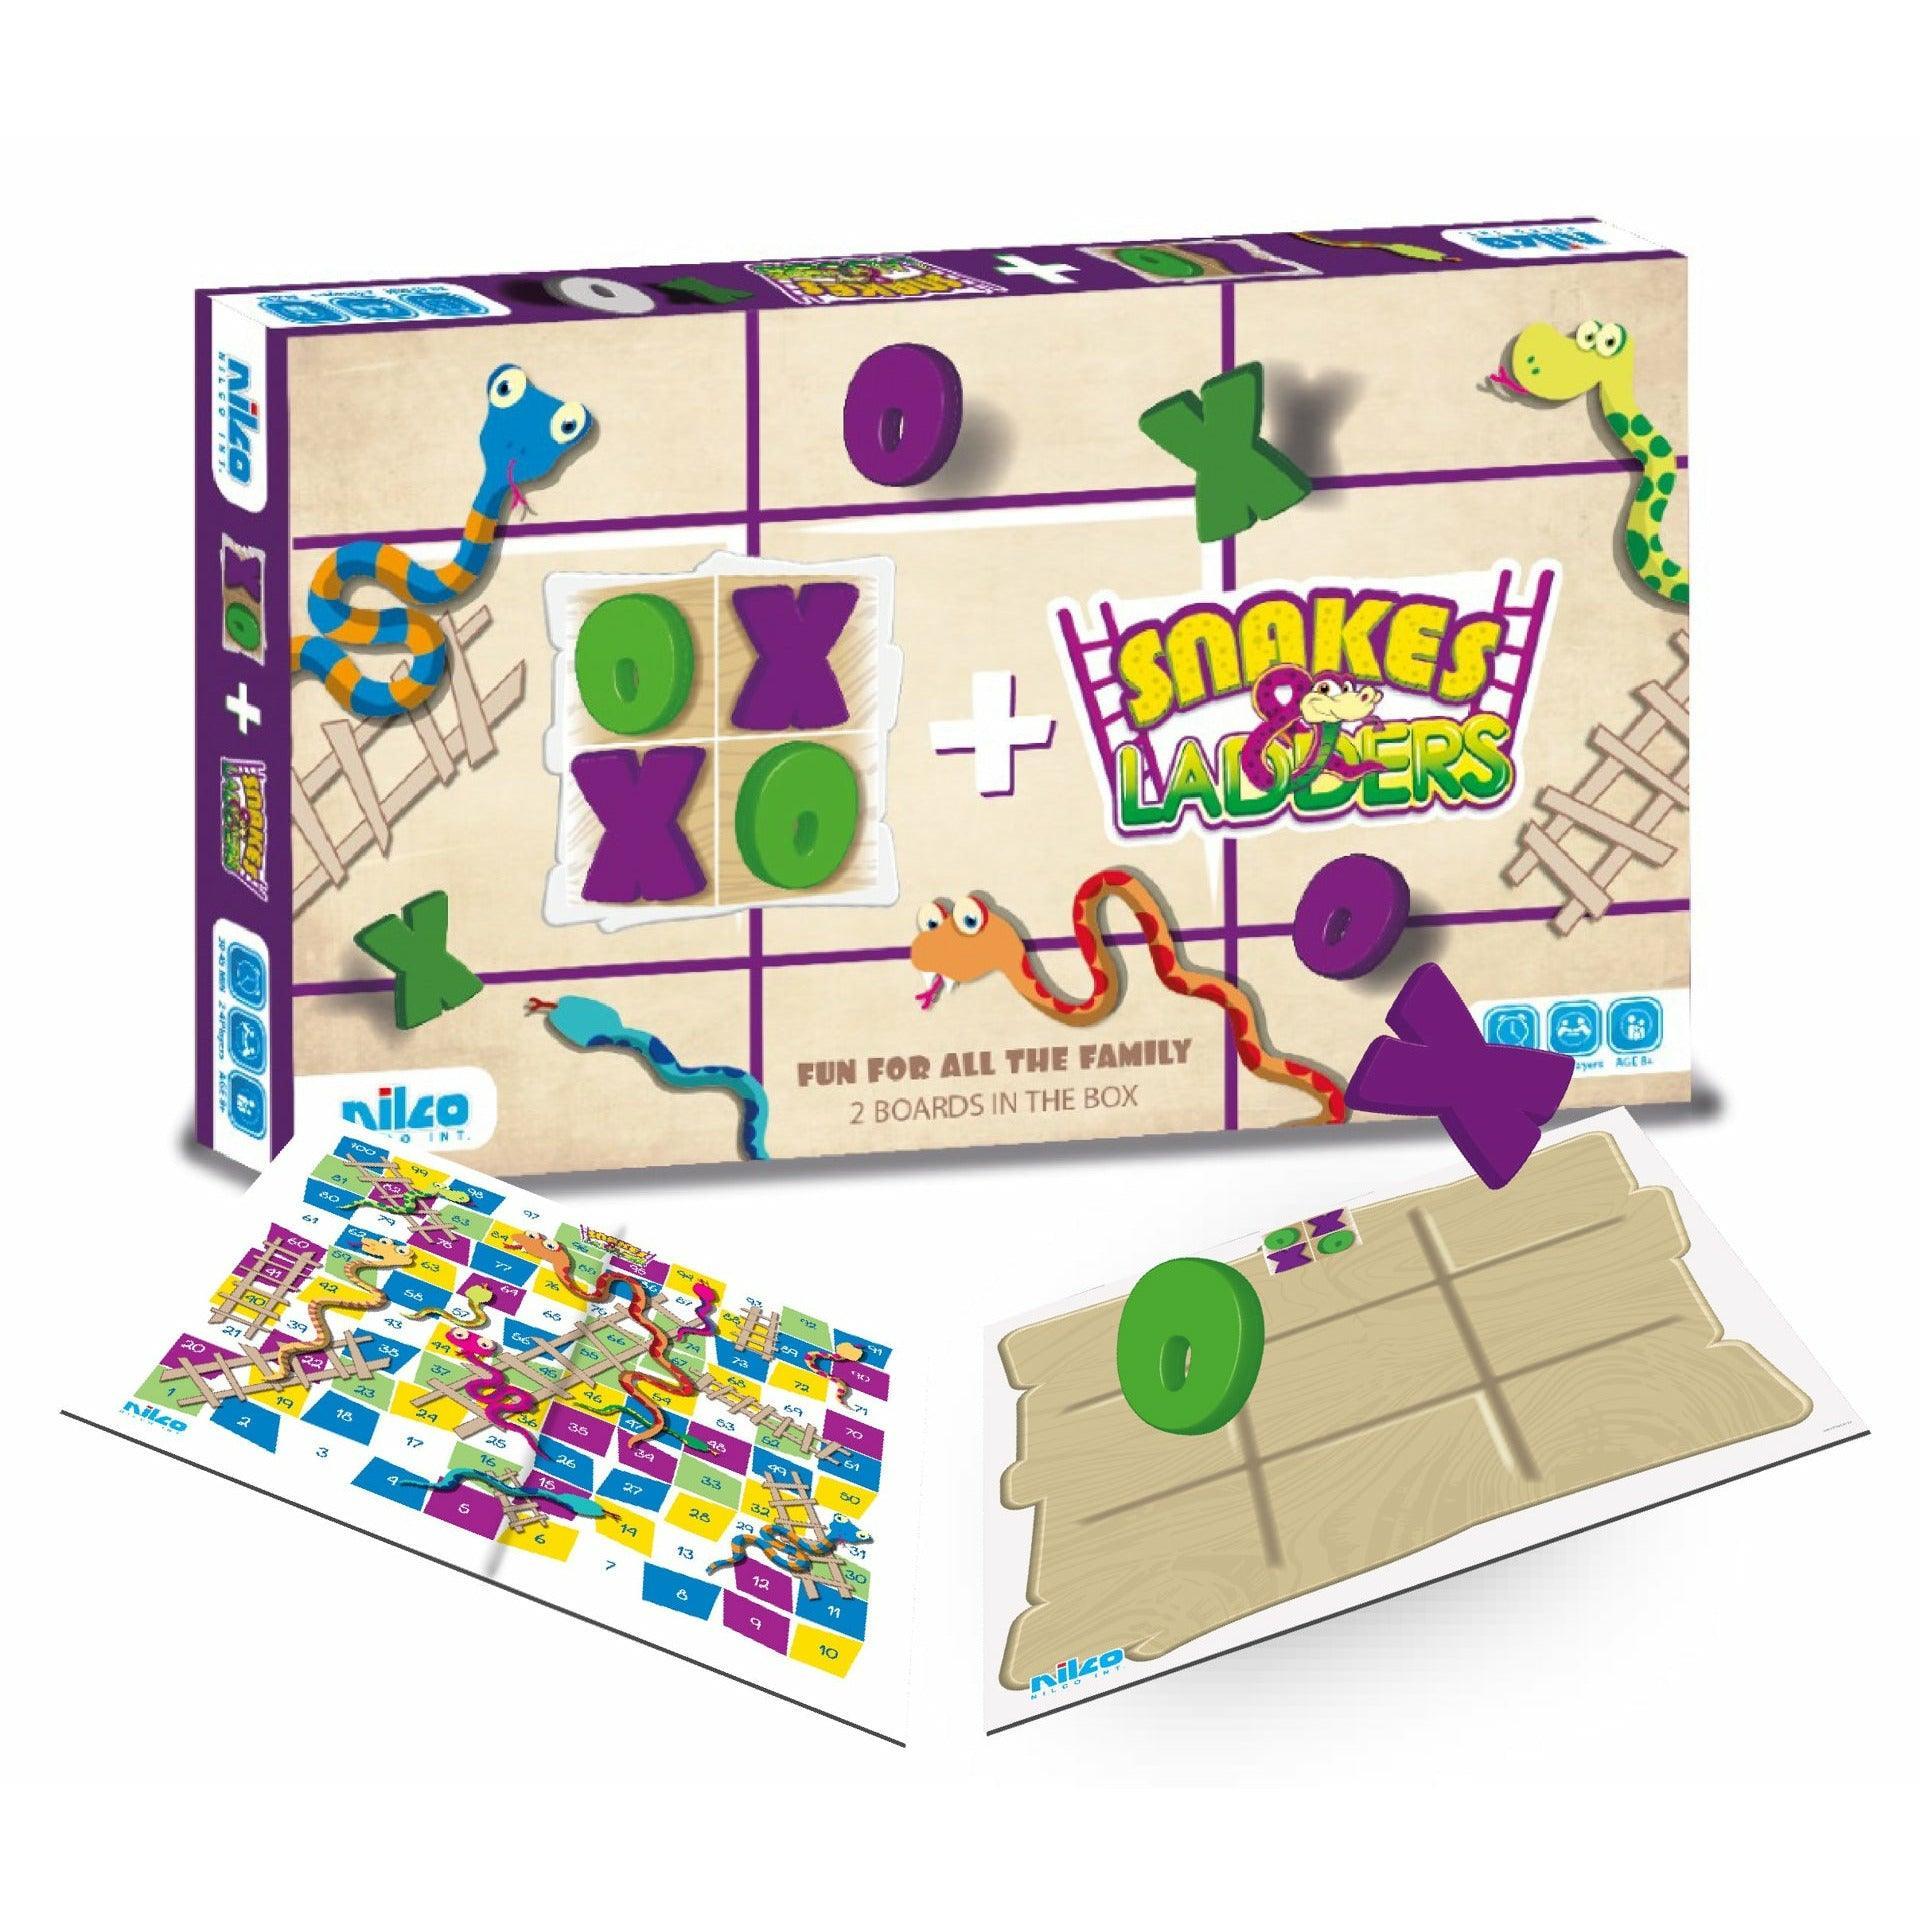 2 In 1 Board Games XO & Snakes And Ladders - Ourkids - Nilco